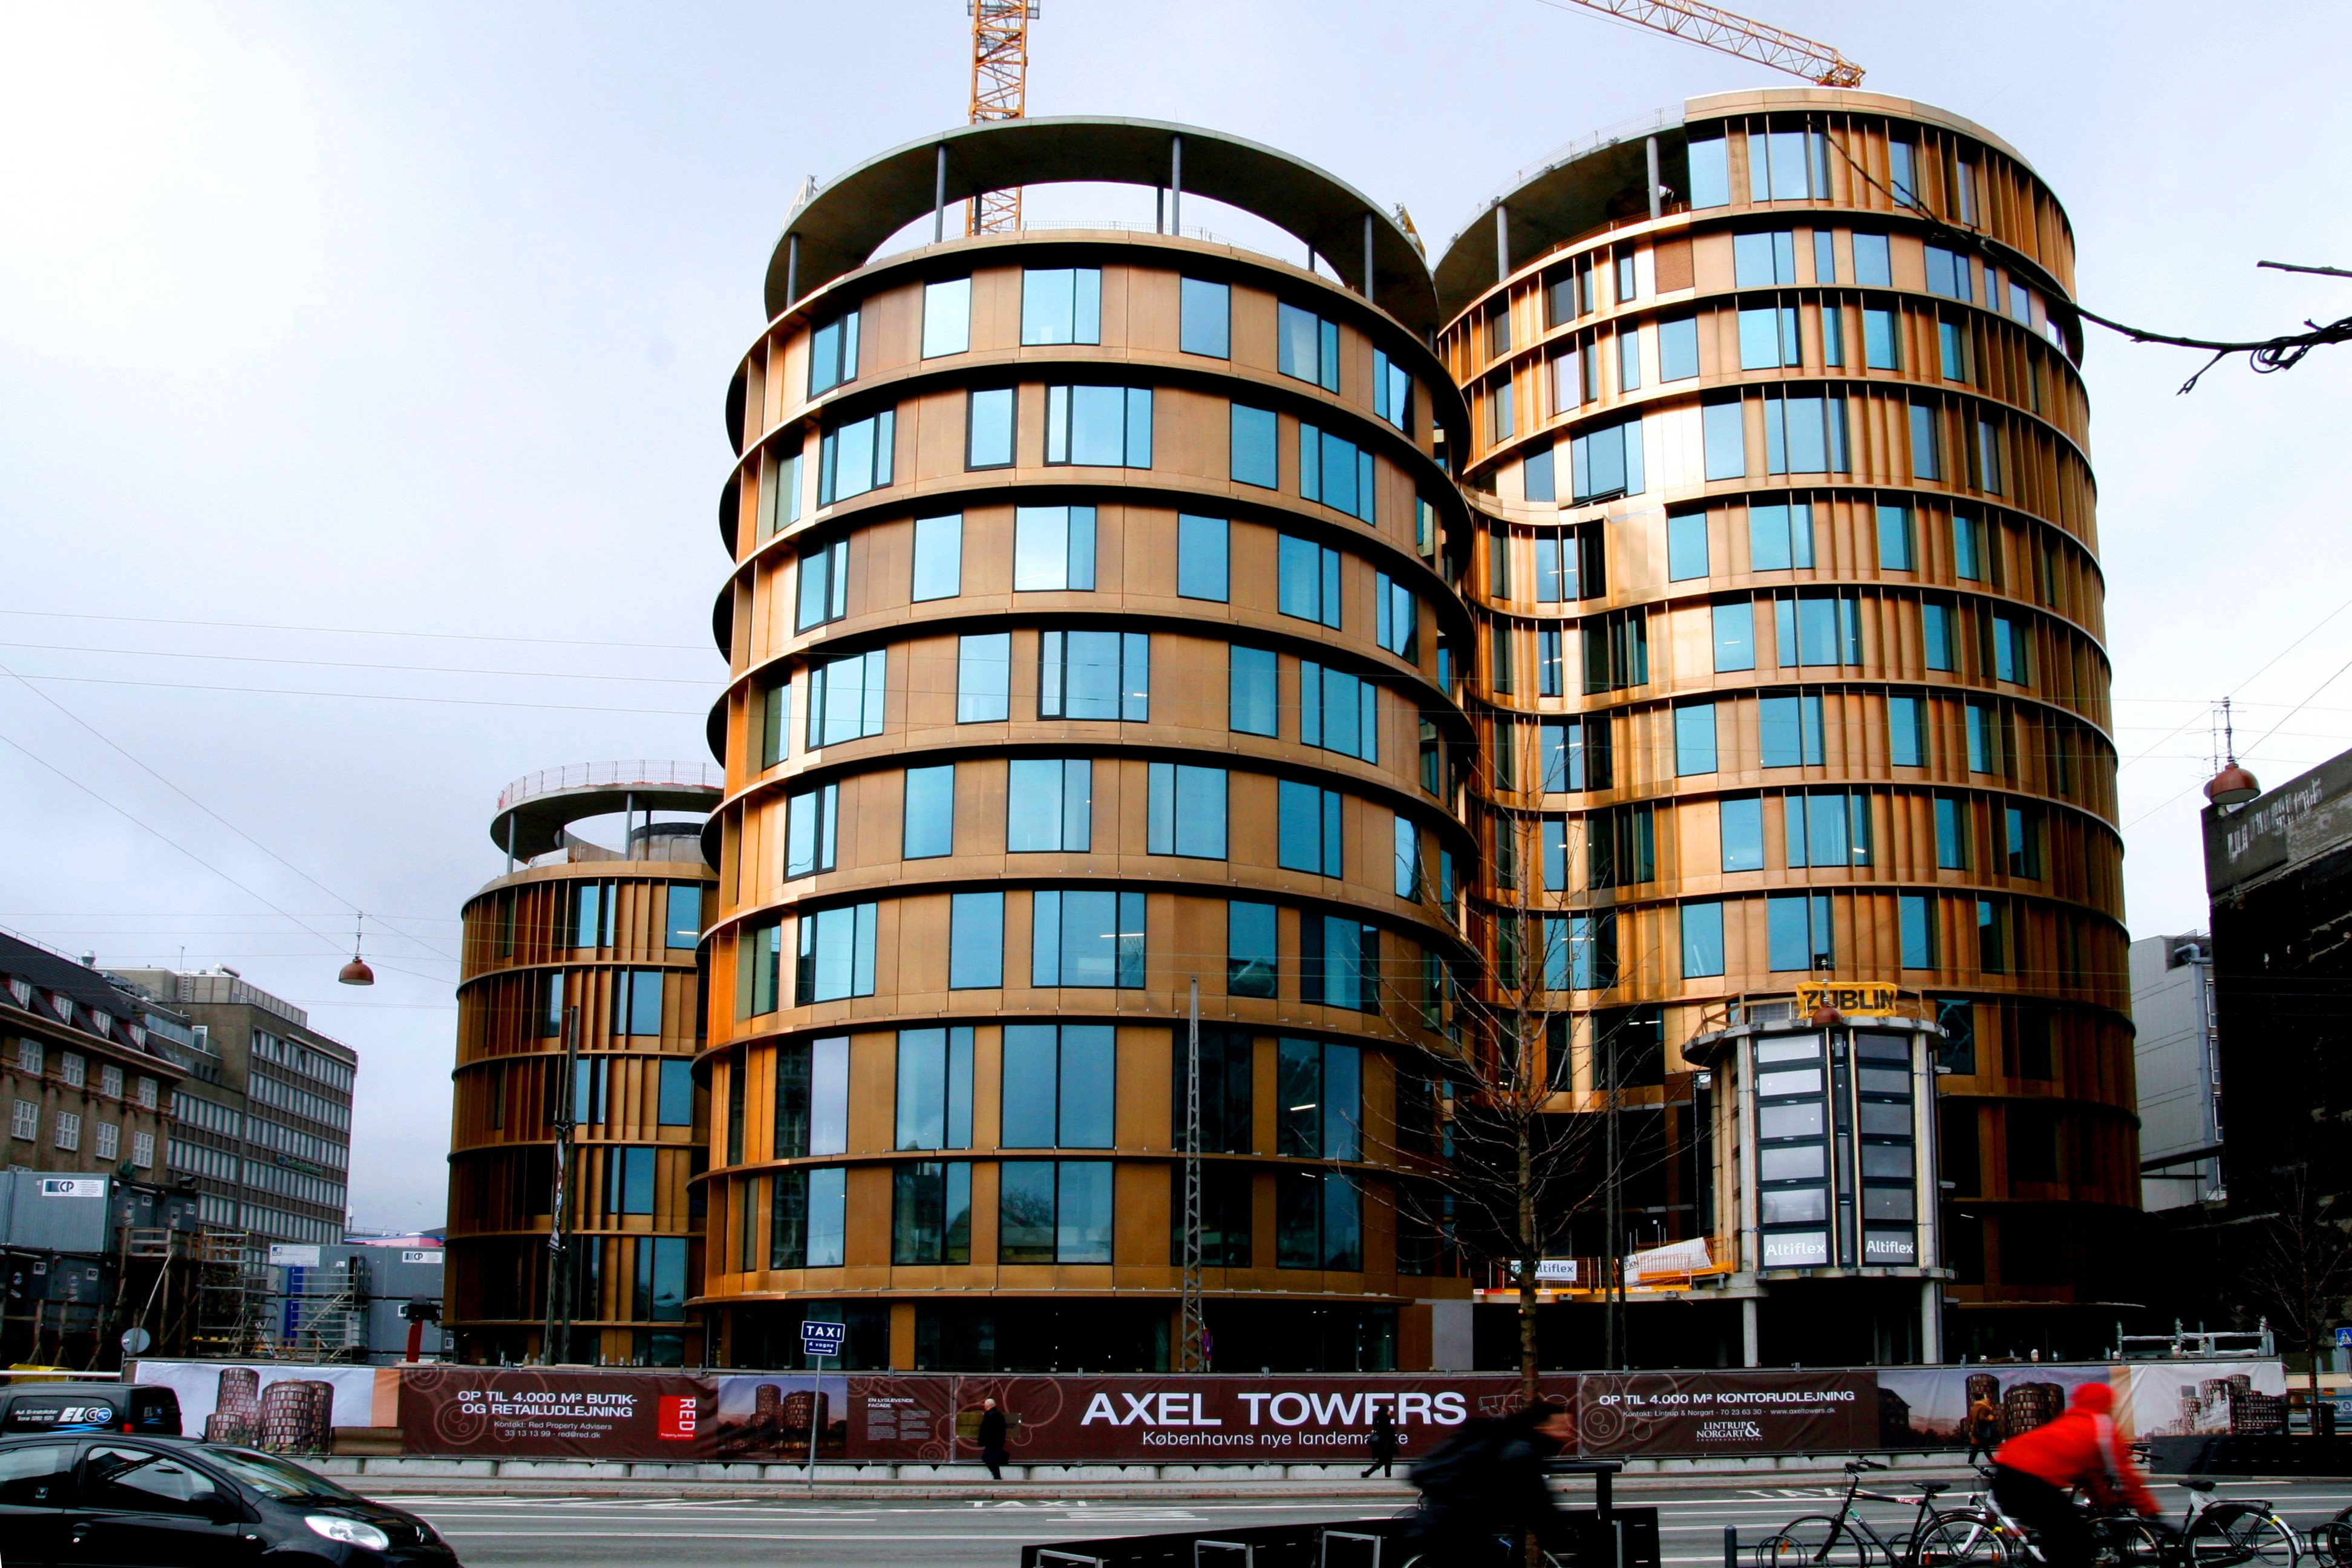 Two round glass towers